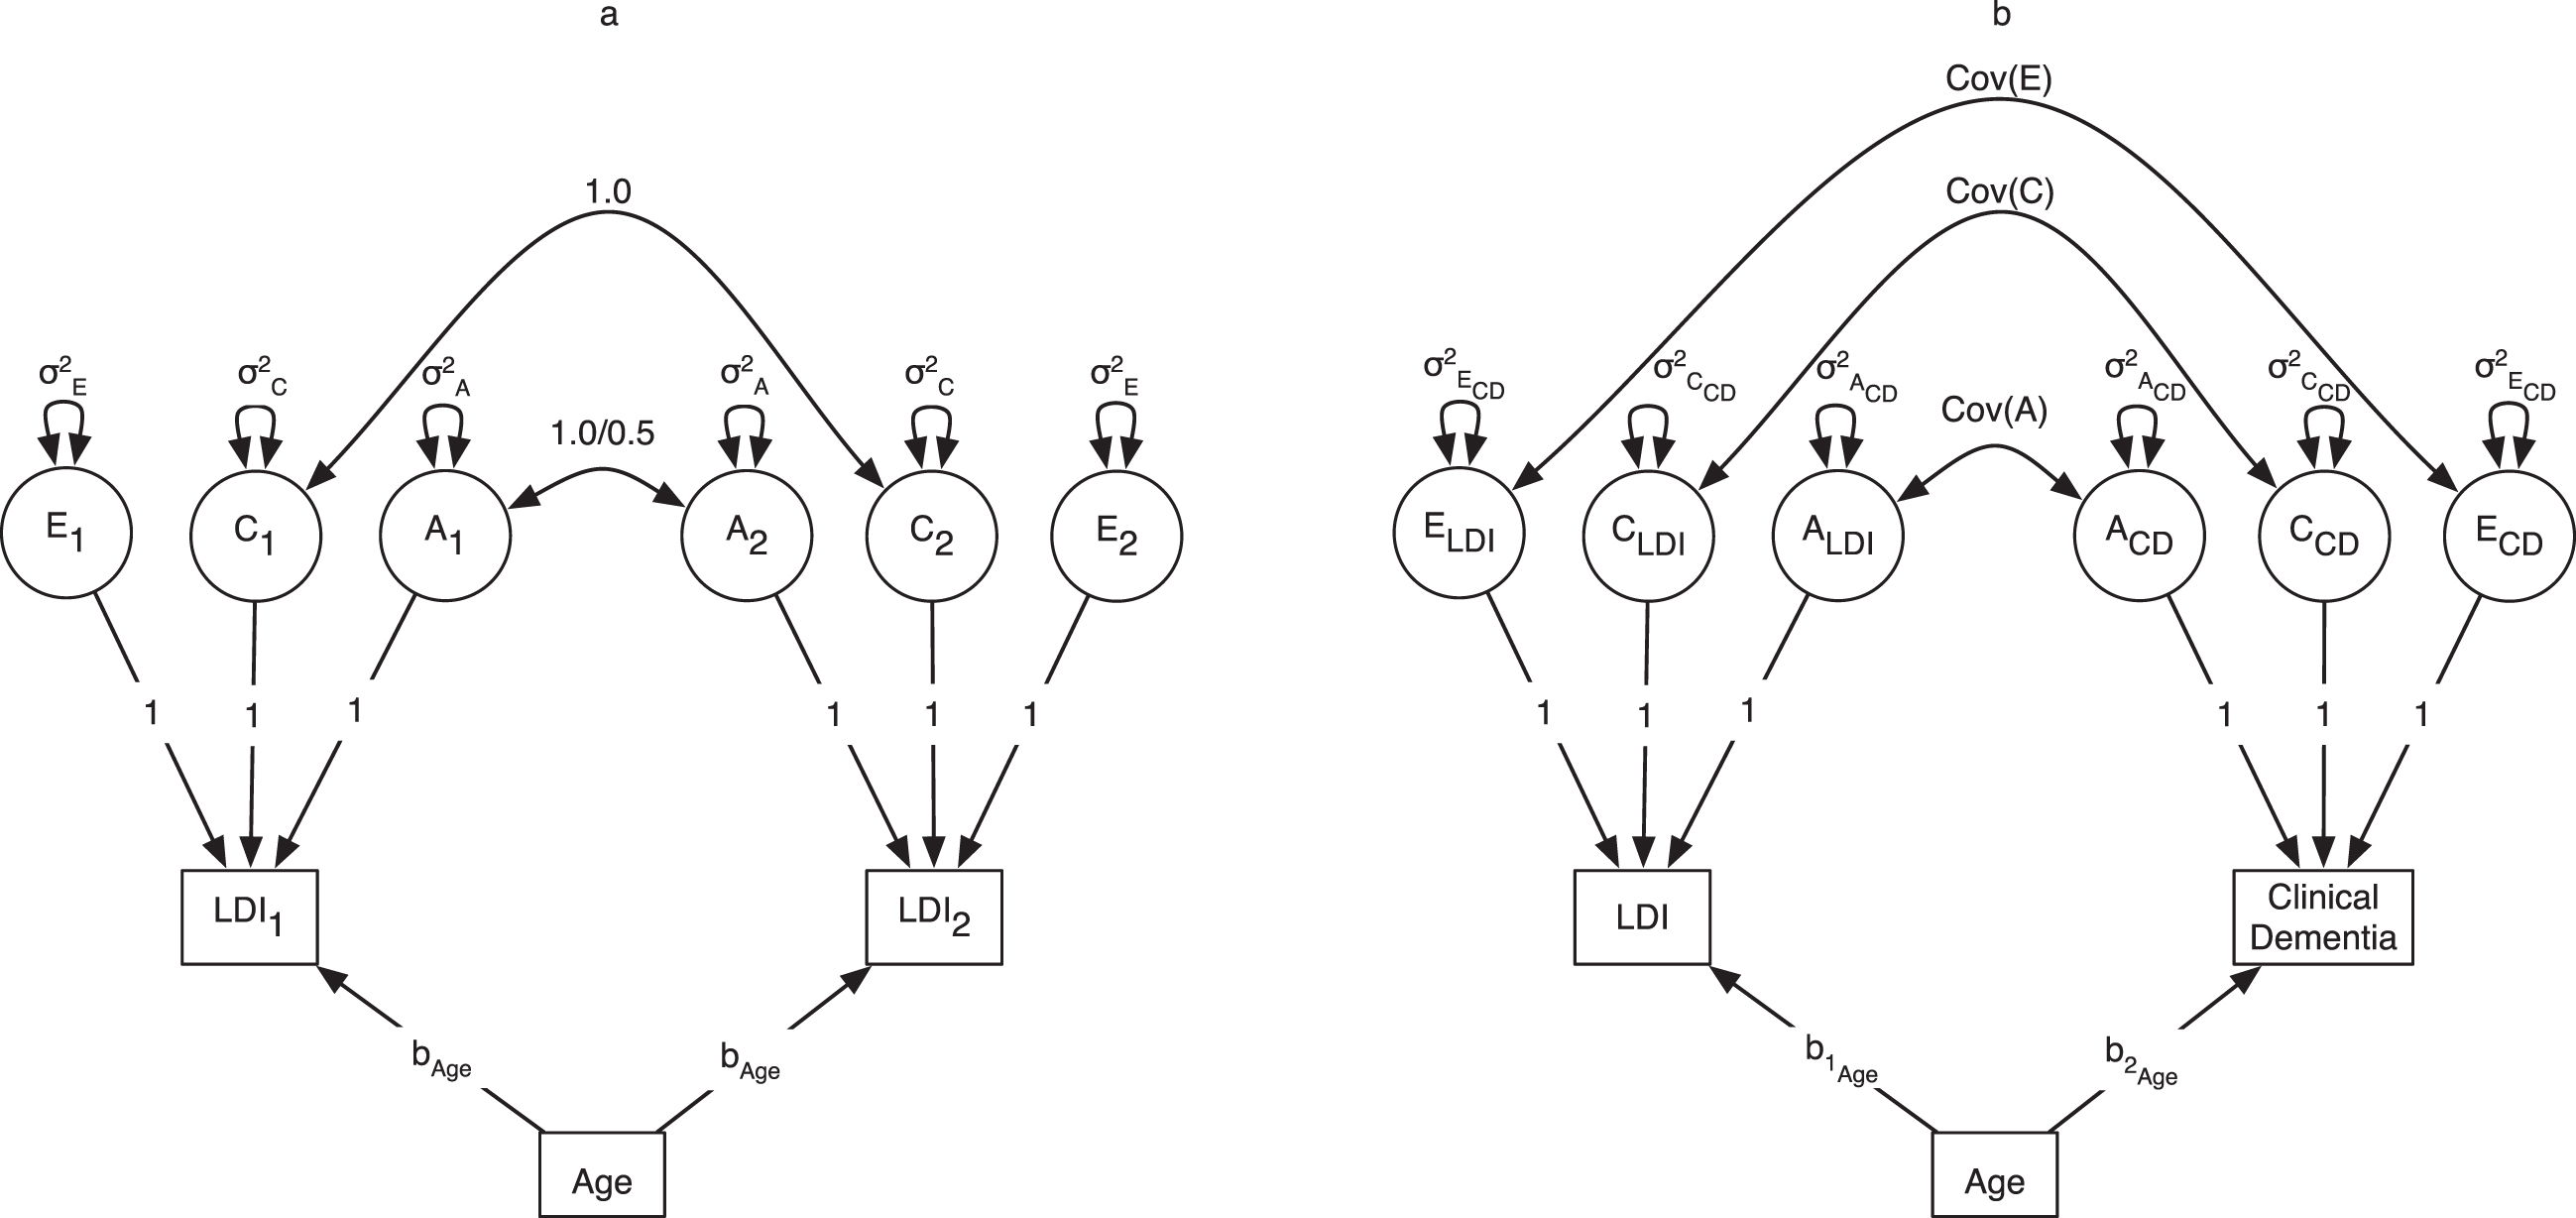 Univariate Twin Model (a) and Bivariate Twin Model (b) for One Twin Only. The univariate model in (a) gives the example of decomposing the observed latent dementia index (LDI) variance into random latent genetic (A), shared environmental (C), and non-shared environmental (E) variance components. In this model, LDI intercepts are estimated and residual variances of the LDI are constrained to be zero. Univariate ACE models were fit to dichotomized clinically diagnosed dementia and dichotomized LDI scores. In these models, thresholds replace intercepts. Effects of age at cognitive assessment (presented) and age2 (not presented) were estimated. The subscripts 1 and 2 refer to twin 1 and twin 2, respectively. The bivariate model (b) estimates decomposes the LDI and clinically diagnosed dementia into random latent genetic (A), shared environmental (C), and non-shared environmental (E) variance components and estimates the correlations between the respective components (Cov(A), Cov(C), and Cov(E)). Effects of age at cognitive assessment (presented) and age2 (not presented) were estimated.